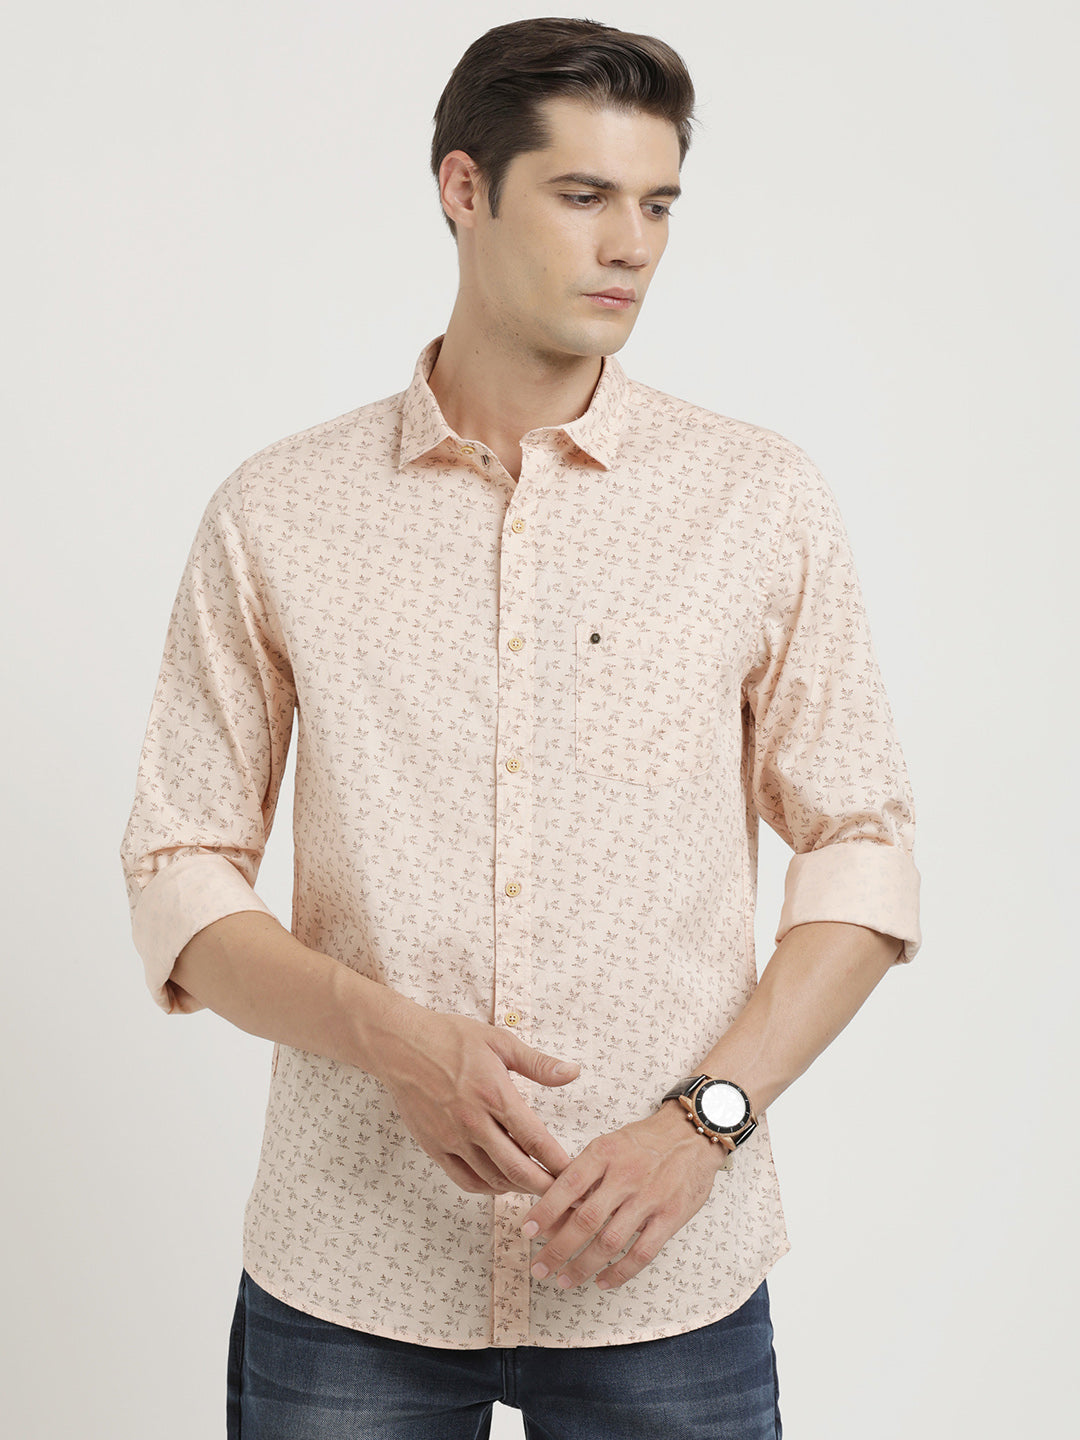 100% Cotton Light Pink Printed Slim Fit Full Sleeve Casual Shirt